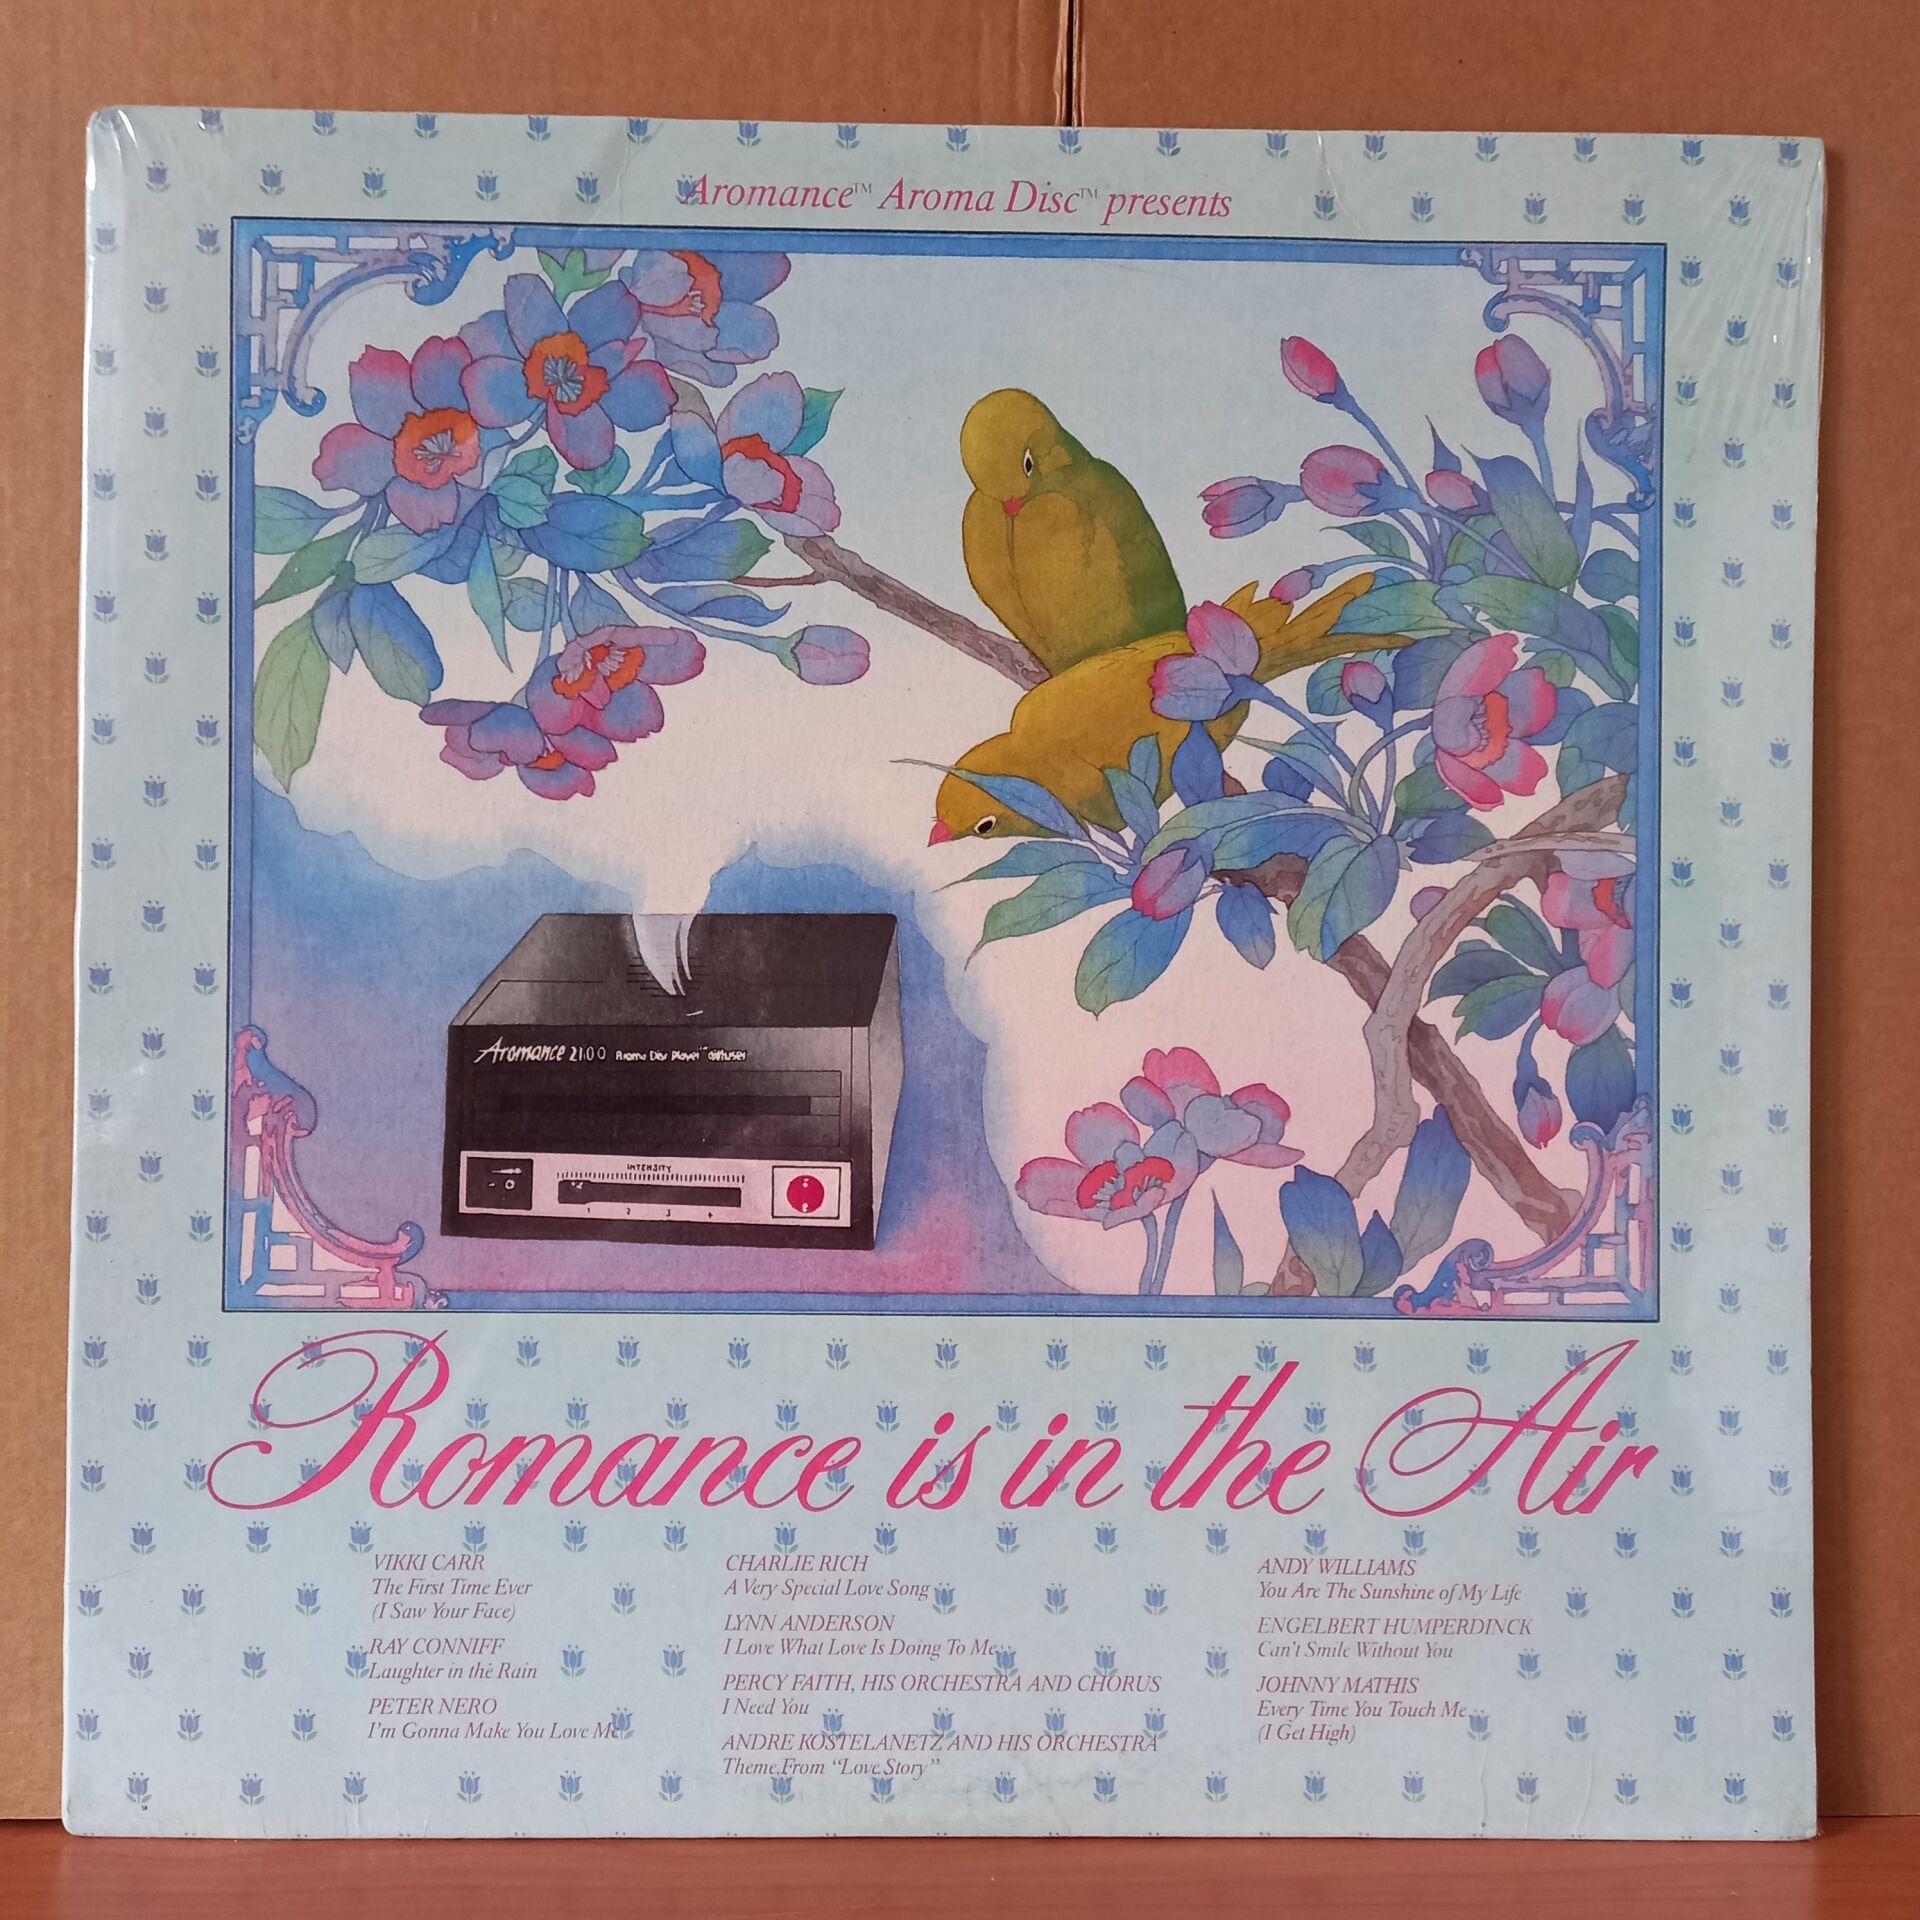 AROMANCE™ AROMA DISC™ PRESENTS ROMANCE IS IN THE AIR / VIKKI CARR, RAY CONNIFF, PETER NERO, CHARLIE RICH, ANDY WILLIAMS, JOHNNY MATHIS (1978) - LP DÖNEM BASKISI SIFIR PLAK